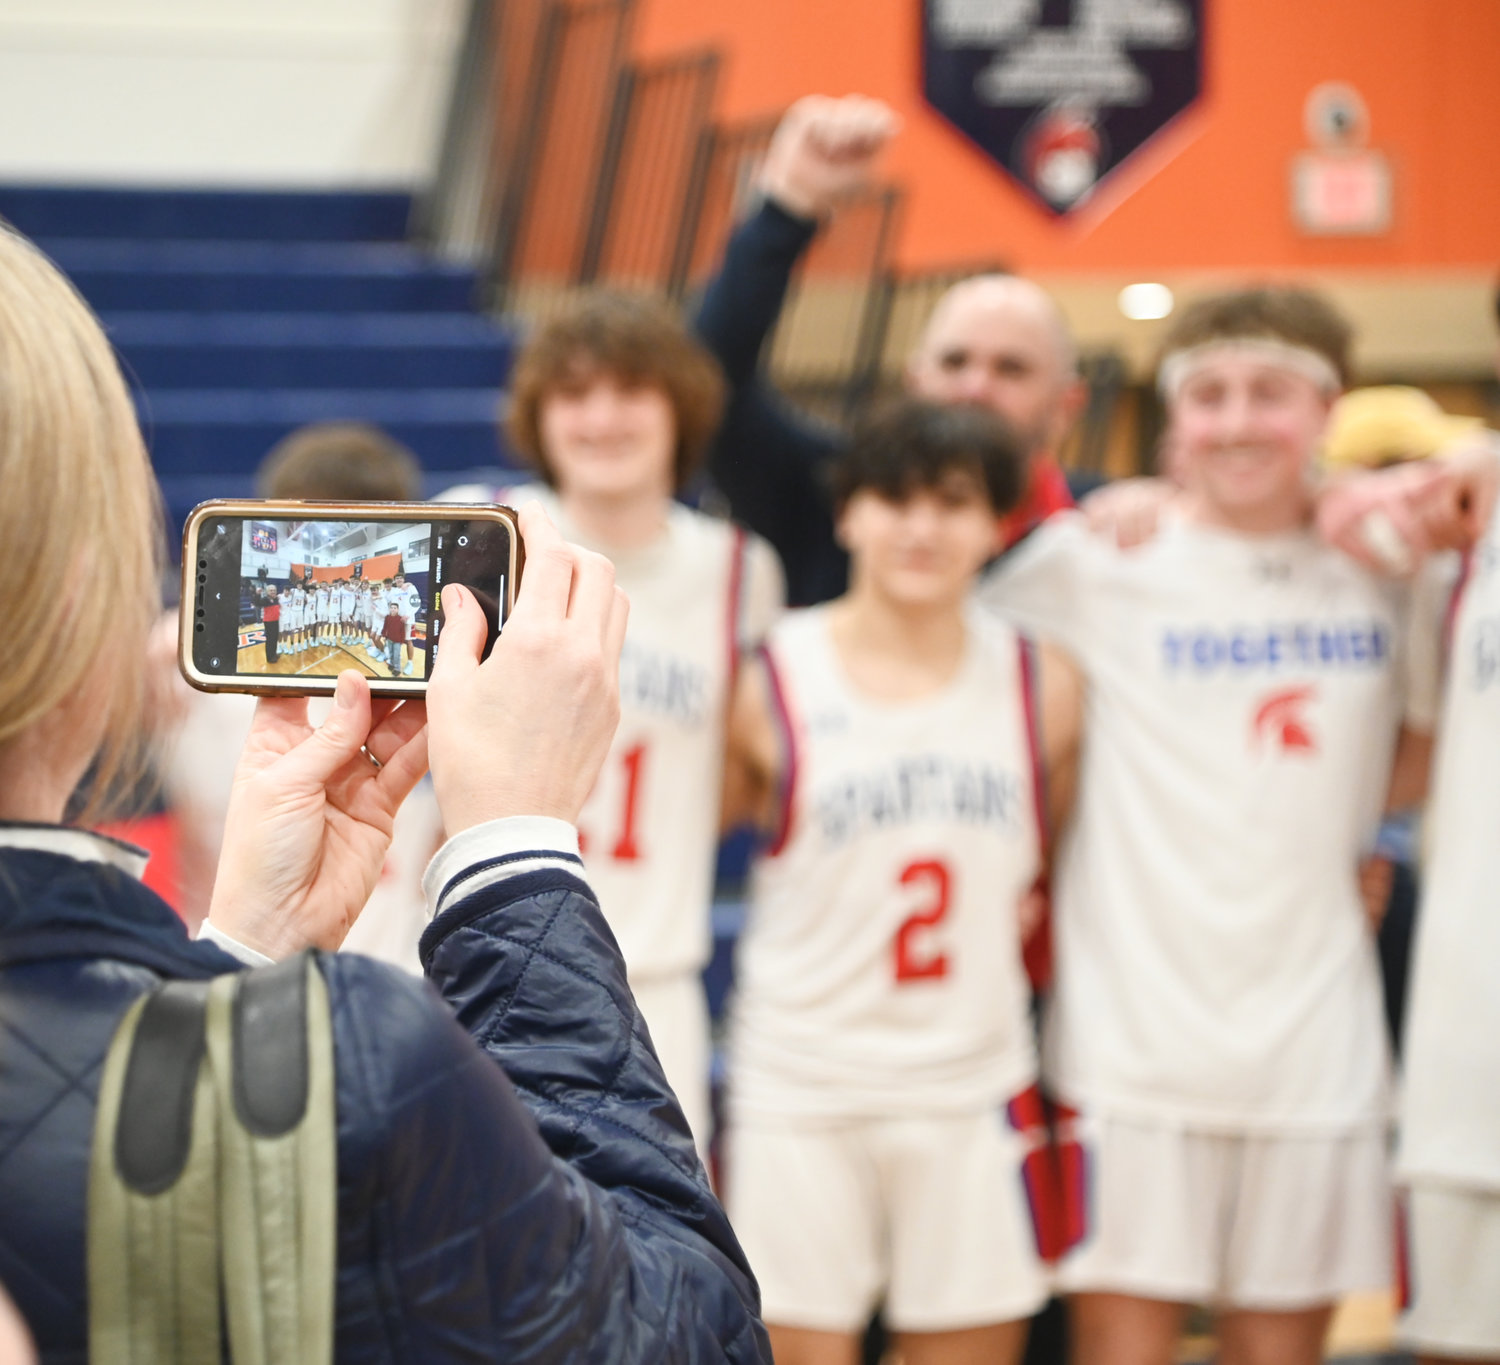 A New Hartford fan snaps a photo following the team's 69-60 win over Troy in the Class A subregional final on Wednesday at Liverpool High School.